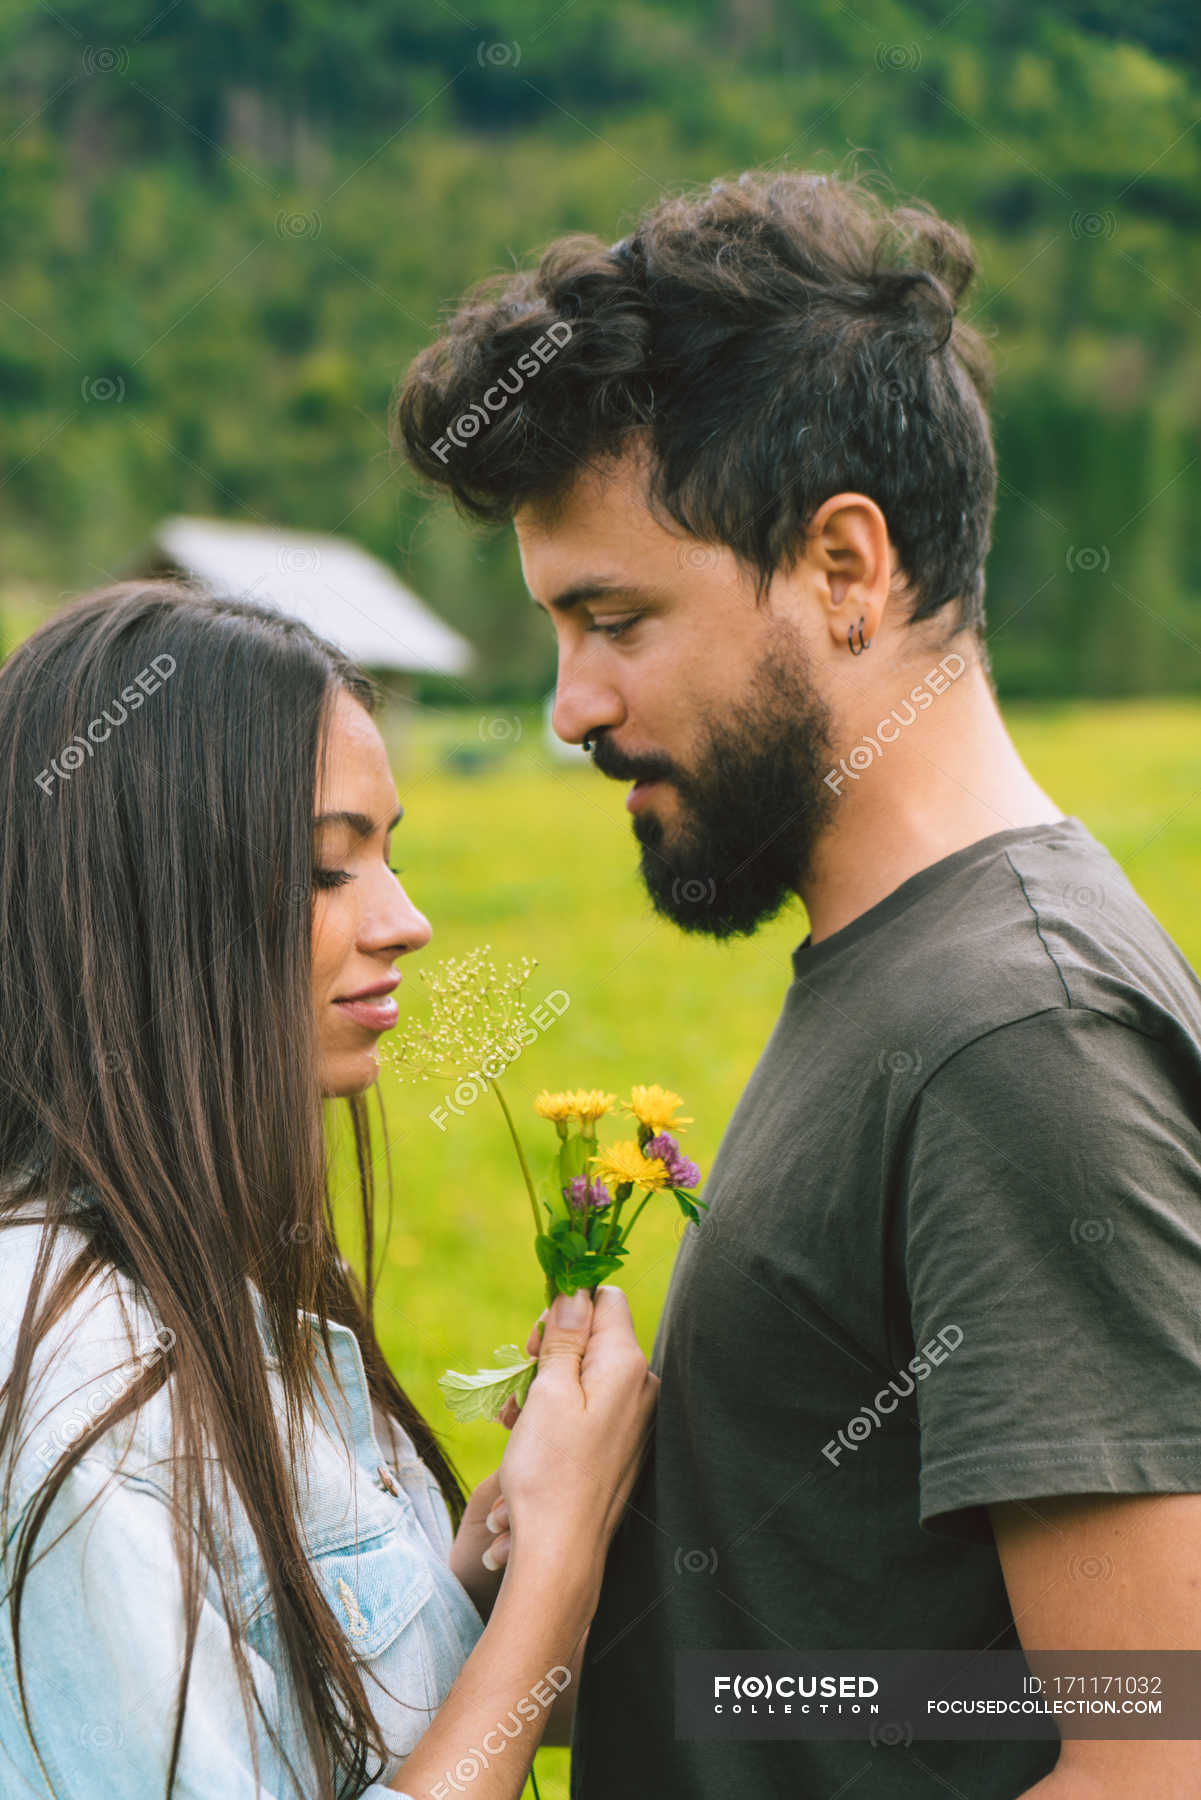 Couple cuddling on meadow — countryside, people - Stock Photo | #171171032